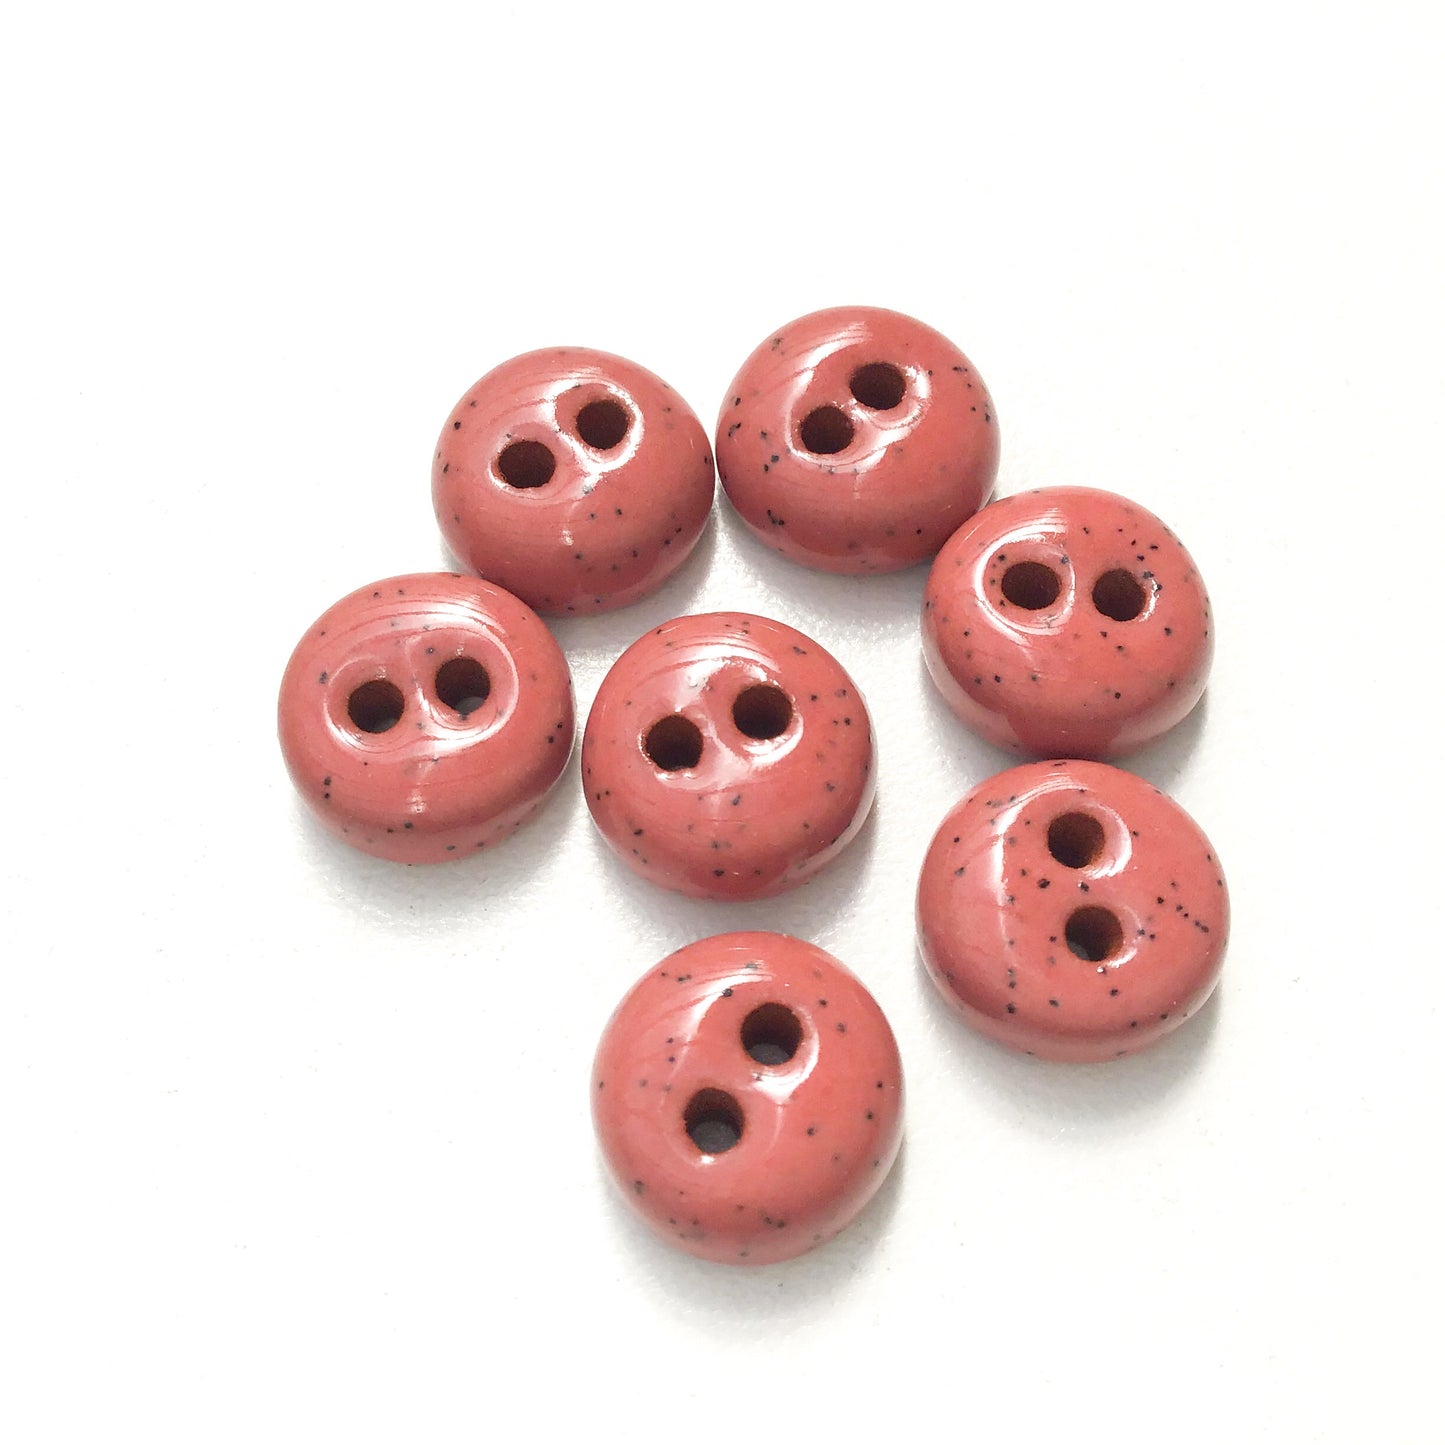 Speckled Earthy Rose Ceramic Buttons - Hand Made Clay Buttons - 7/16" - 7 Pack